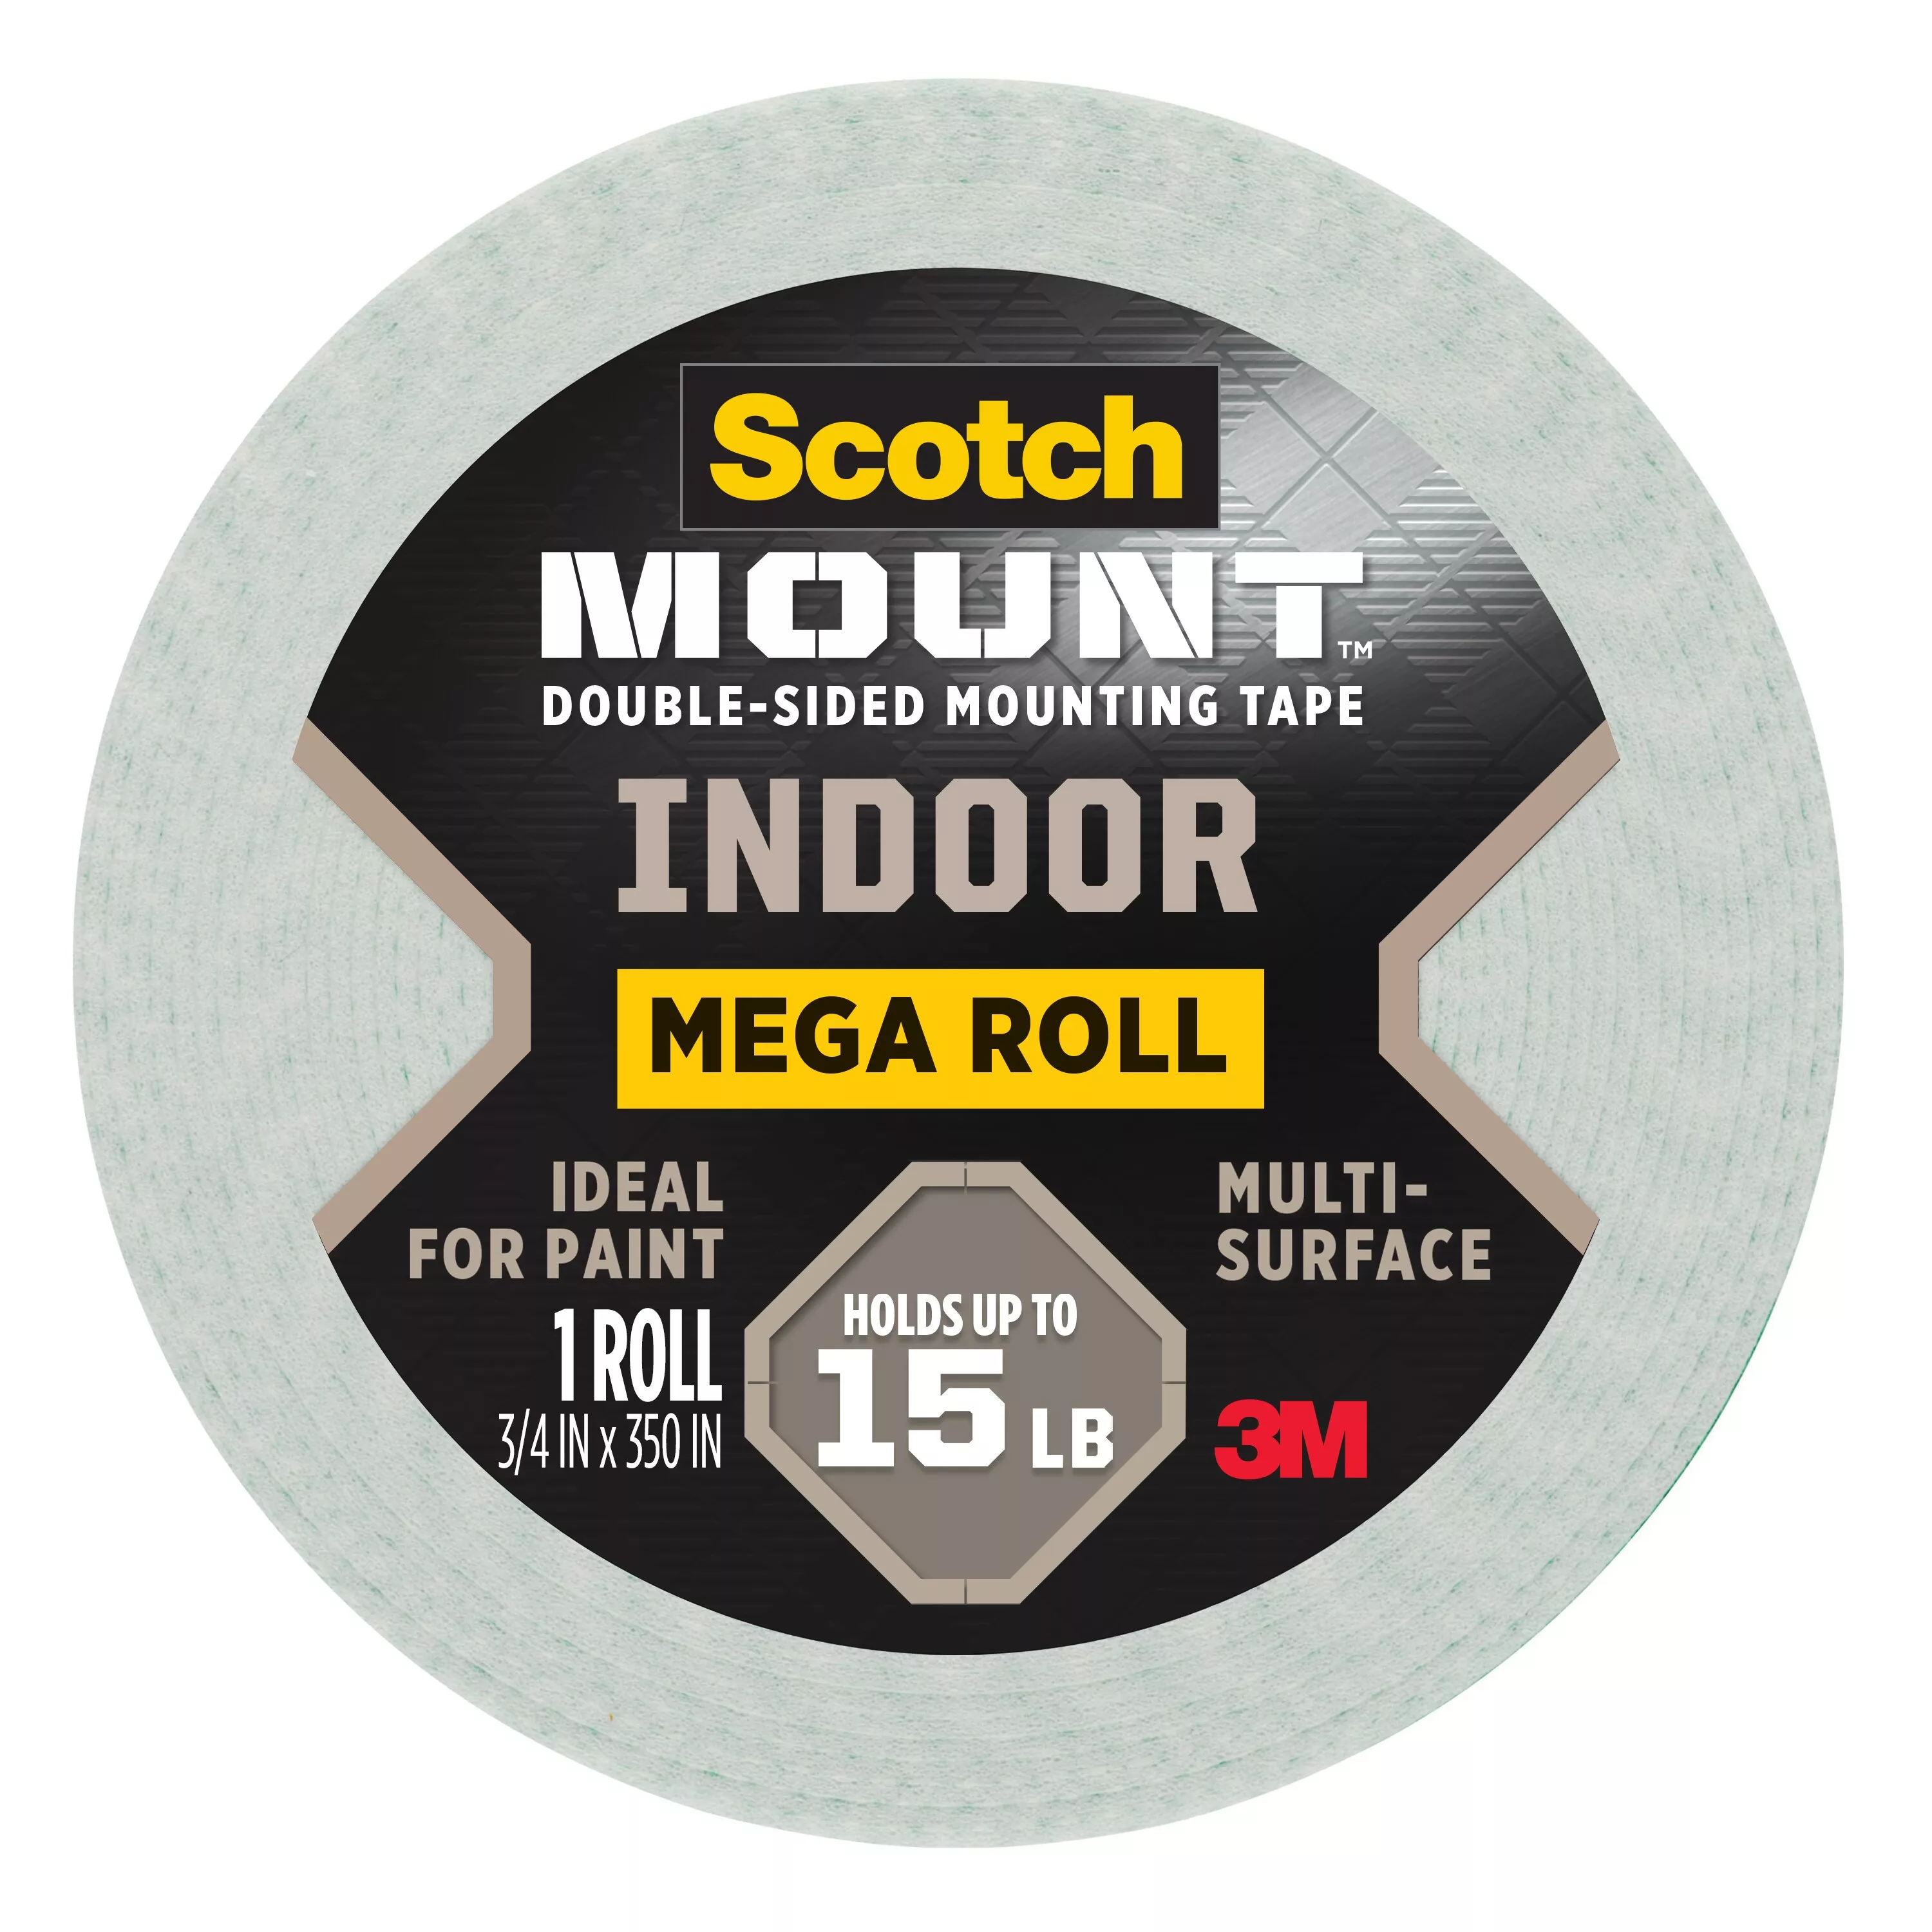 Scotch-Mount™ Indoor Double-Sided Mounting Tape Mega Roll 110H-LONG-DC,
3/4 In X 350 In (1,9 Cm X 8,89 M)